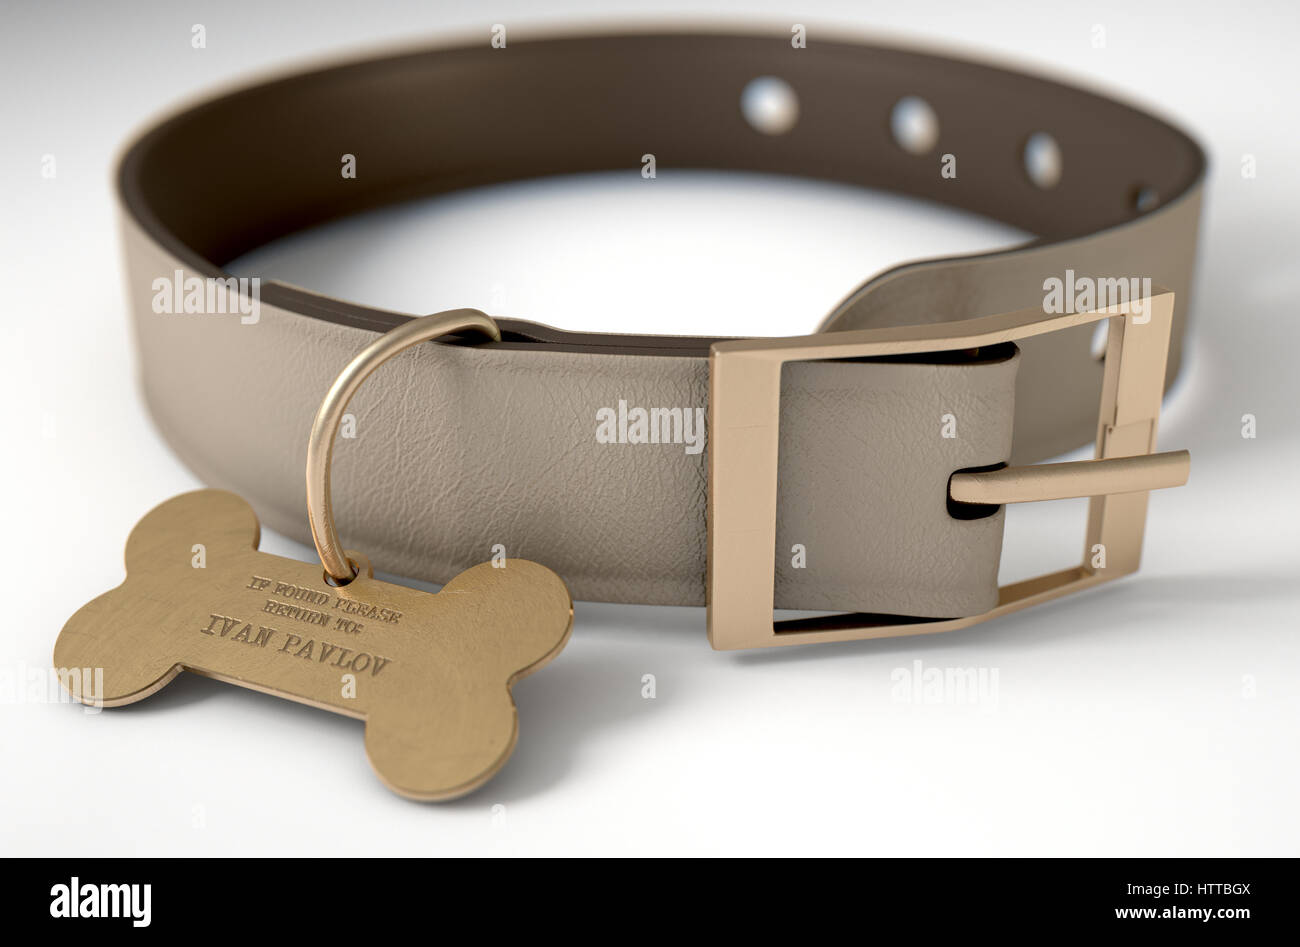 A concept depicting pavlovian conditioning theory of a leather dog collar and a bone shaped identification tag showing ownership to ivan pavlov - 3D r Stock Photo